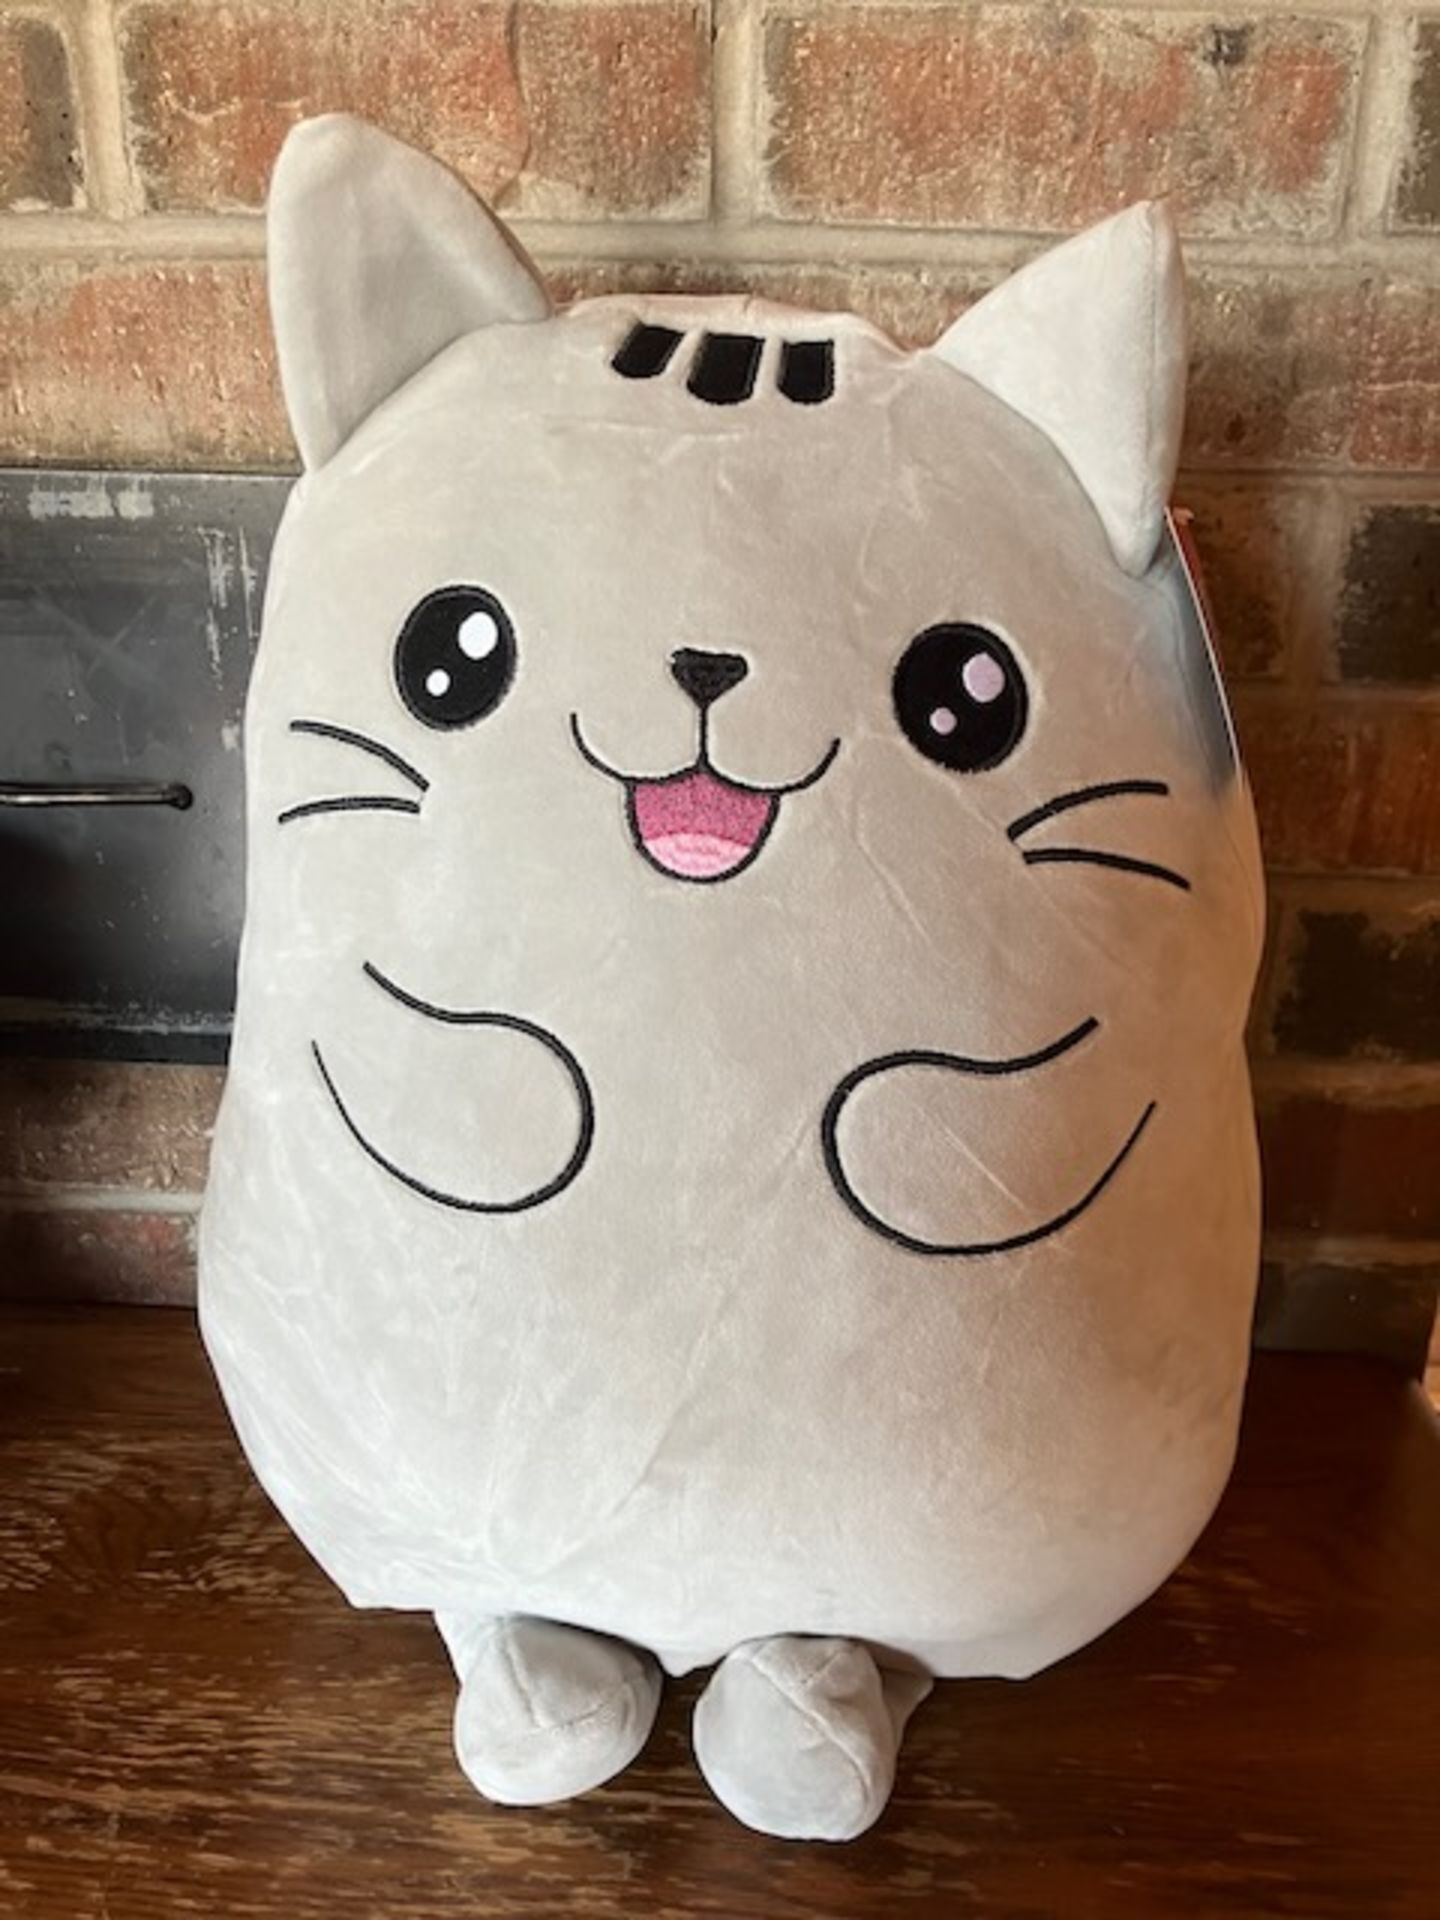 KID CONNECTION PLUSH HAPPY KITTY (15" high) - Image 2 of 2